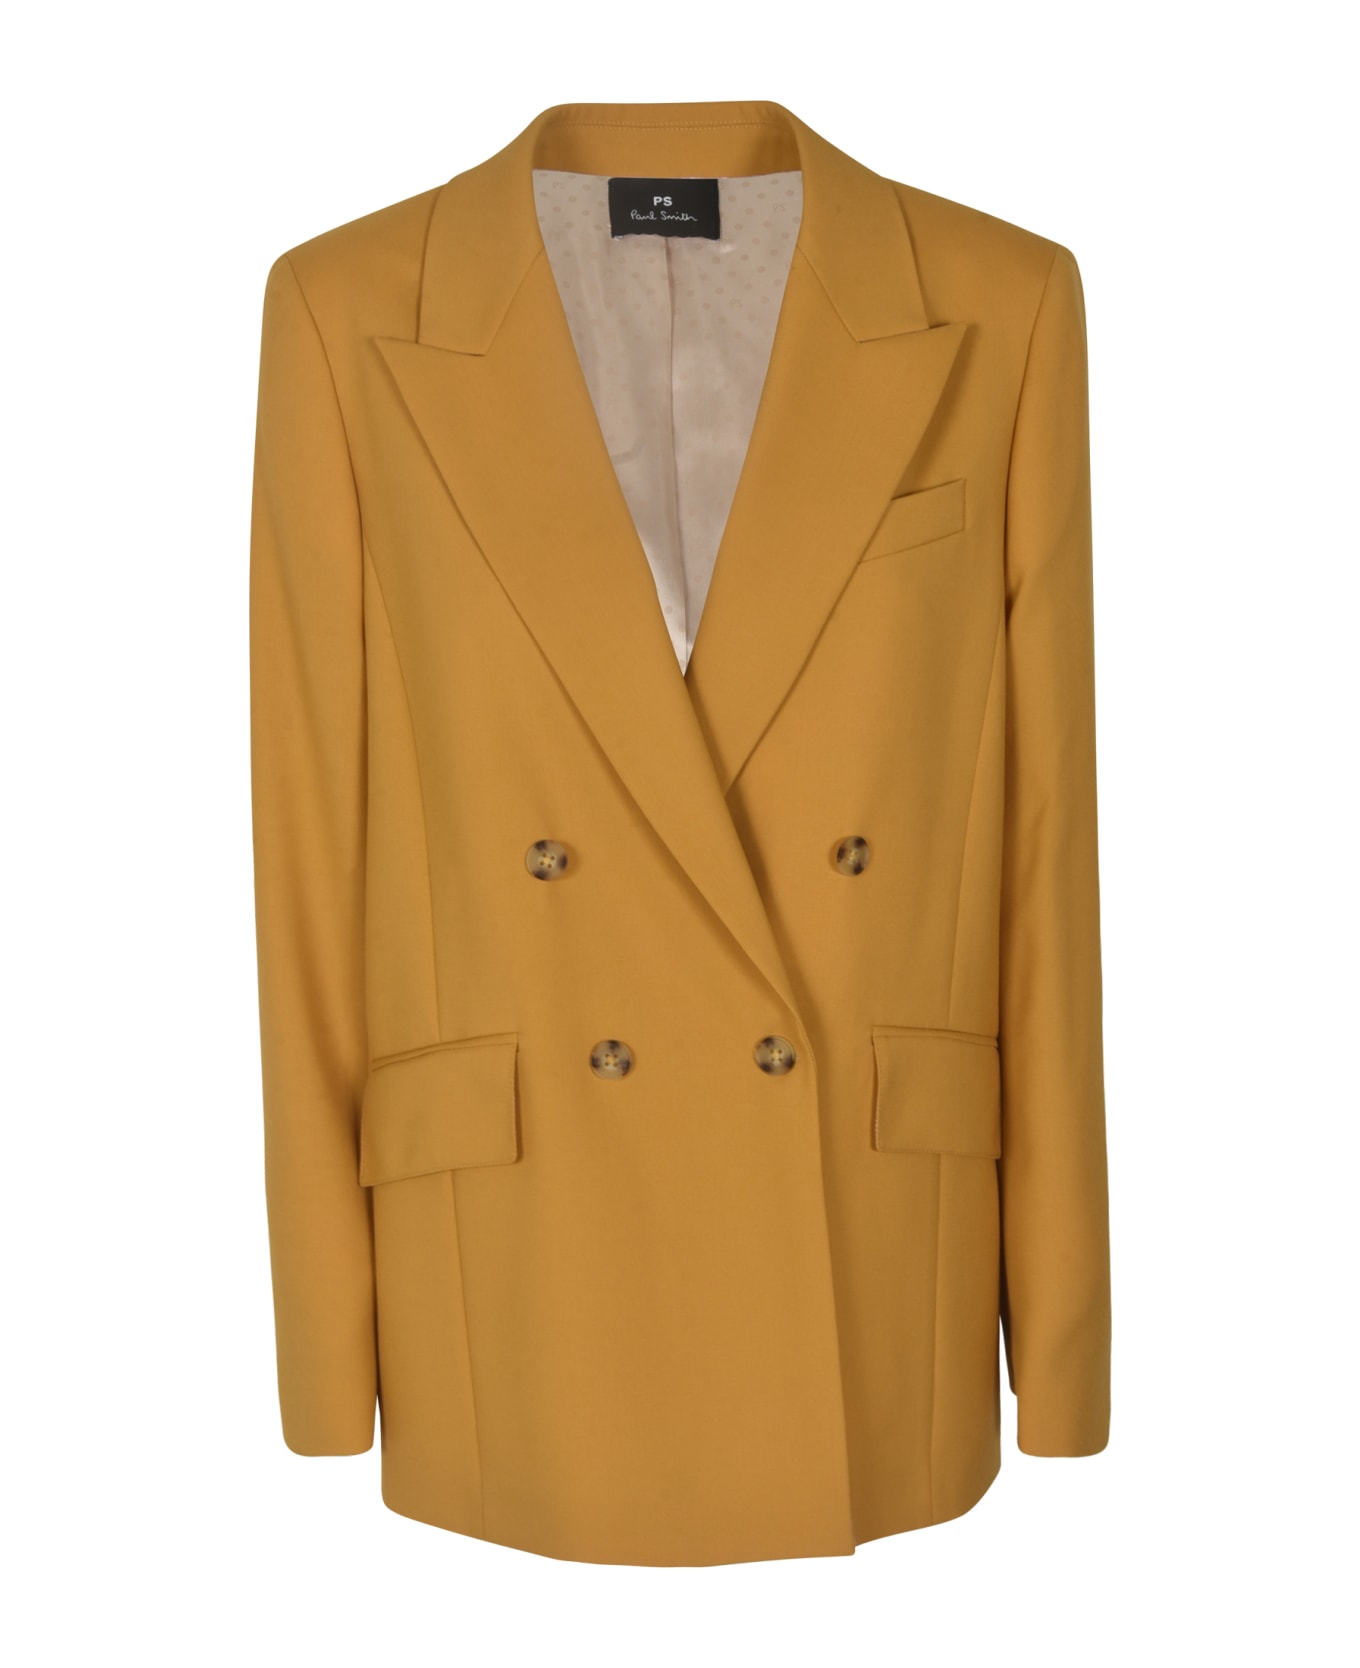 Paul Smith Double-breasted Tri-pocket Dinner Jacket - Acid